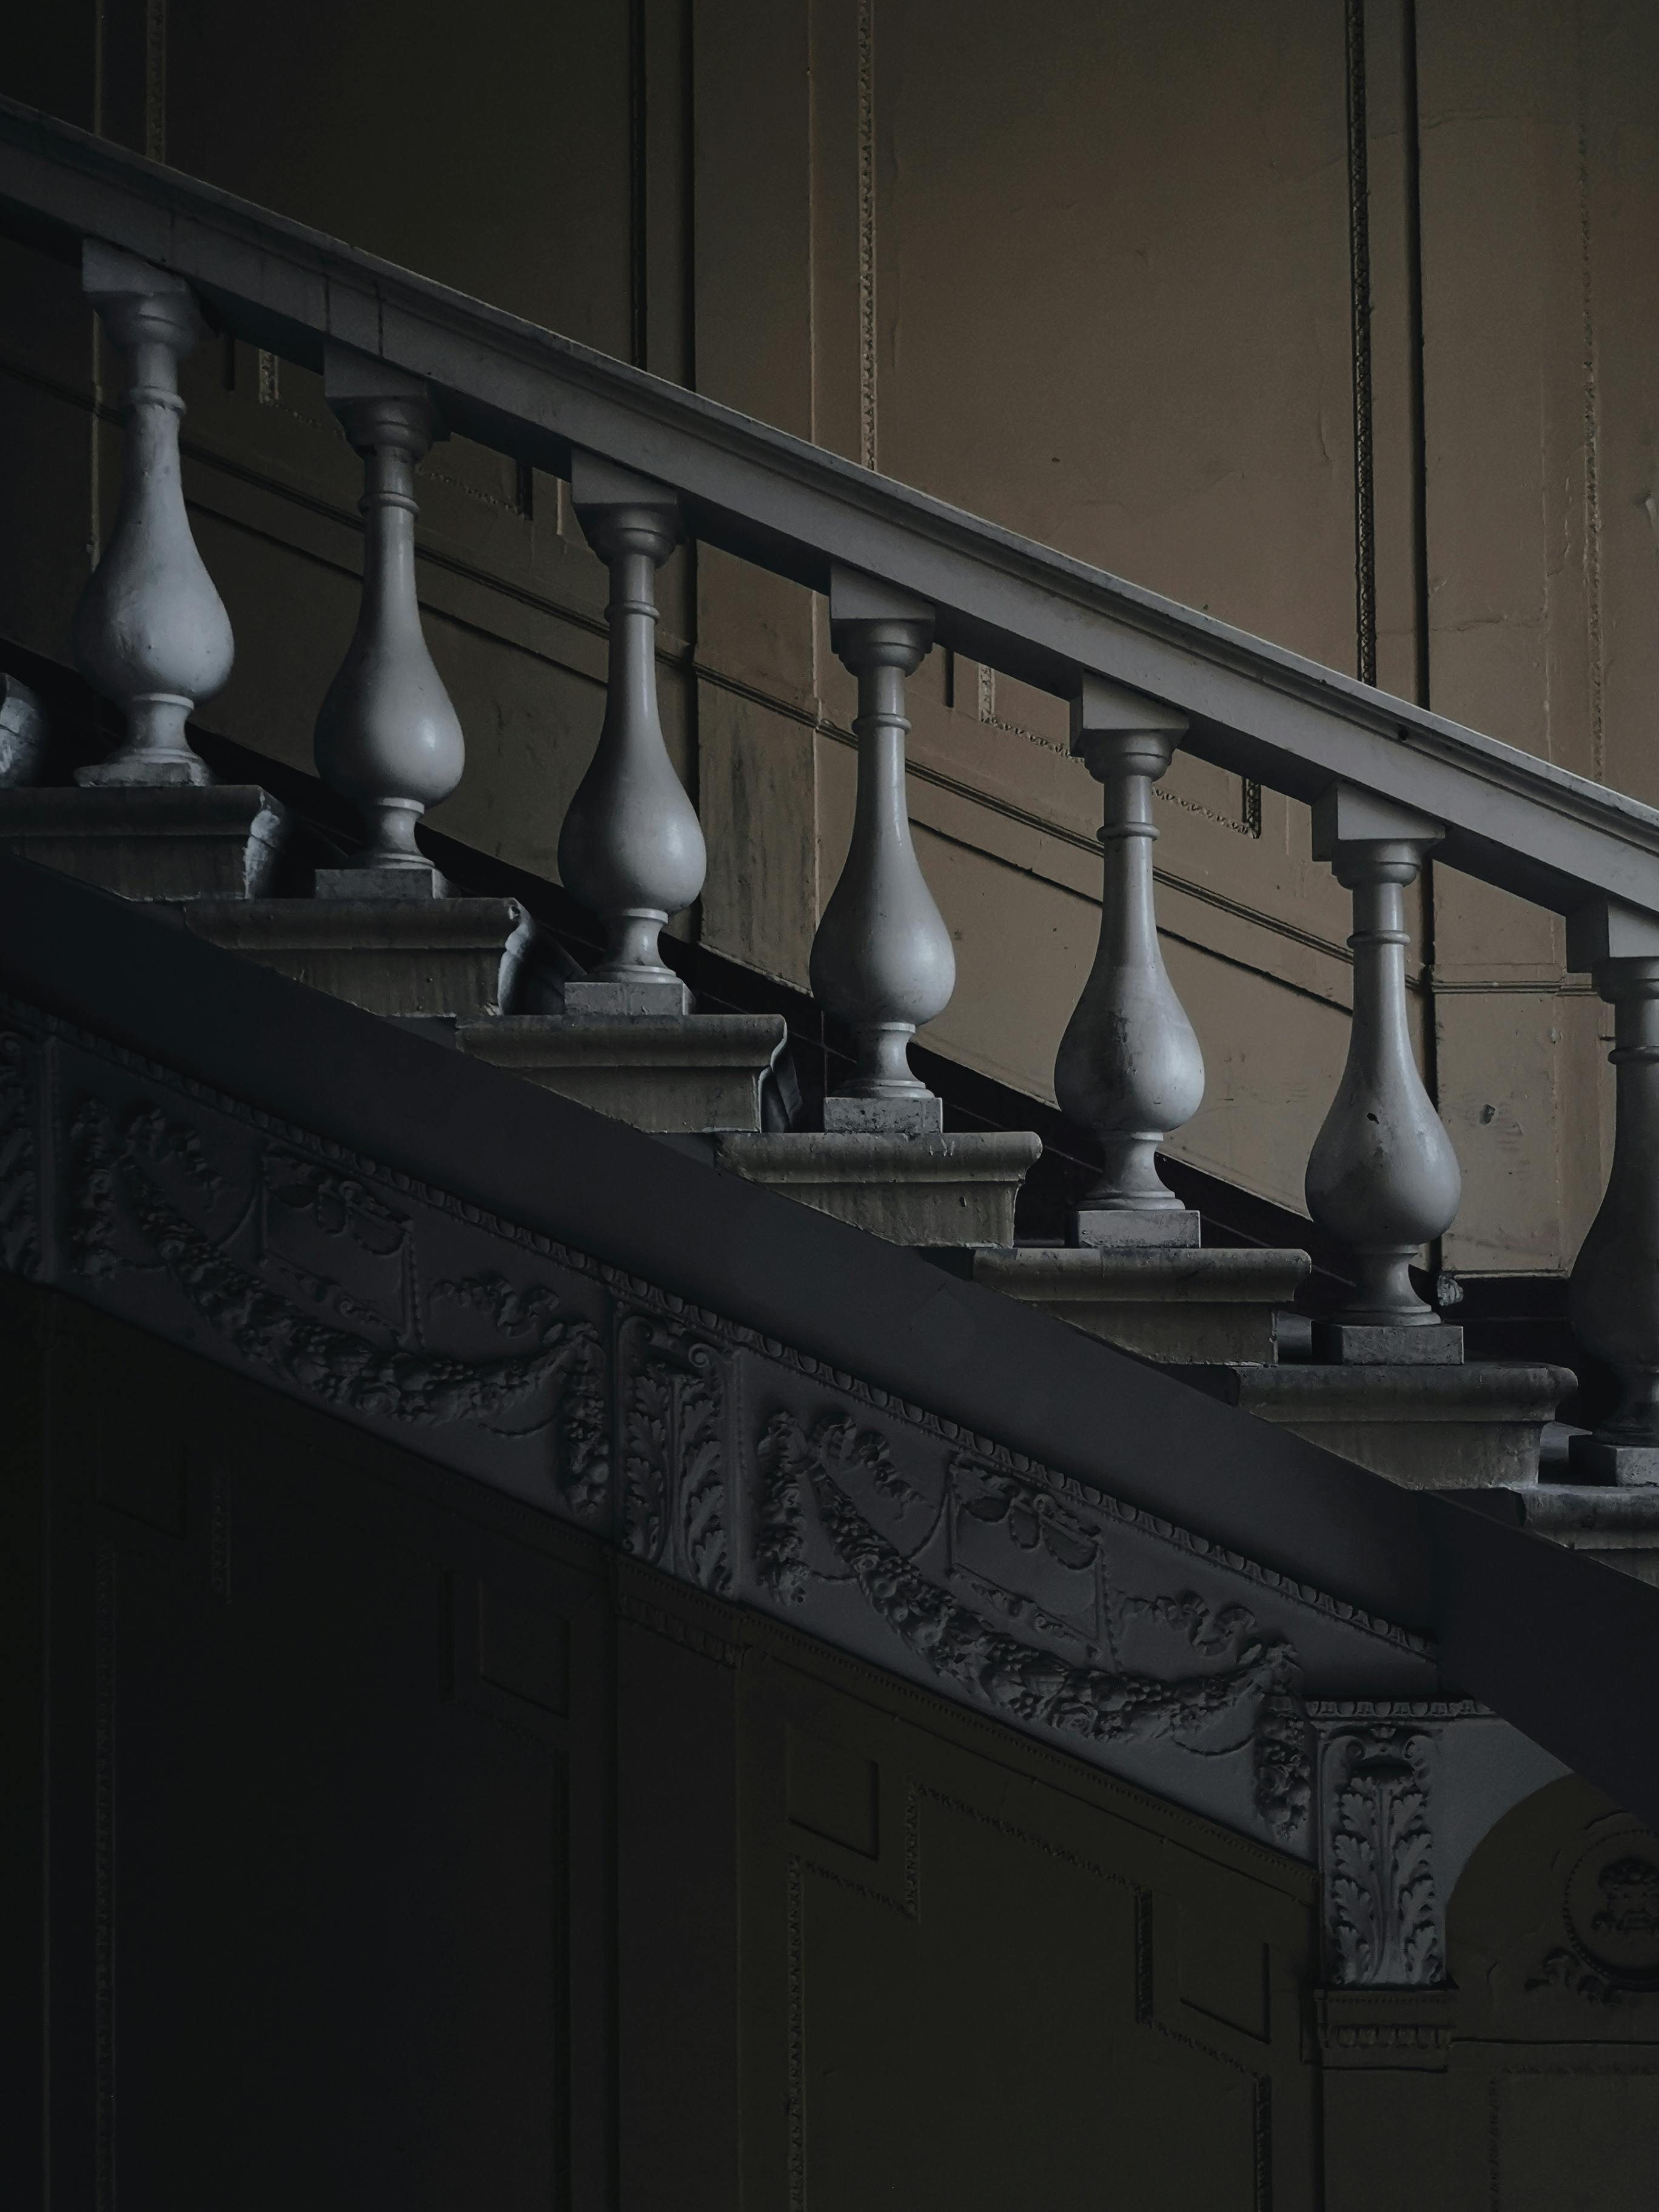 Emma quietly descends the stairs at night, sensing something is amiss | Source: Pexels